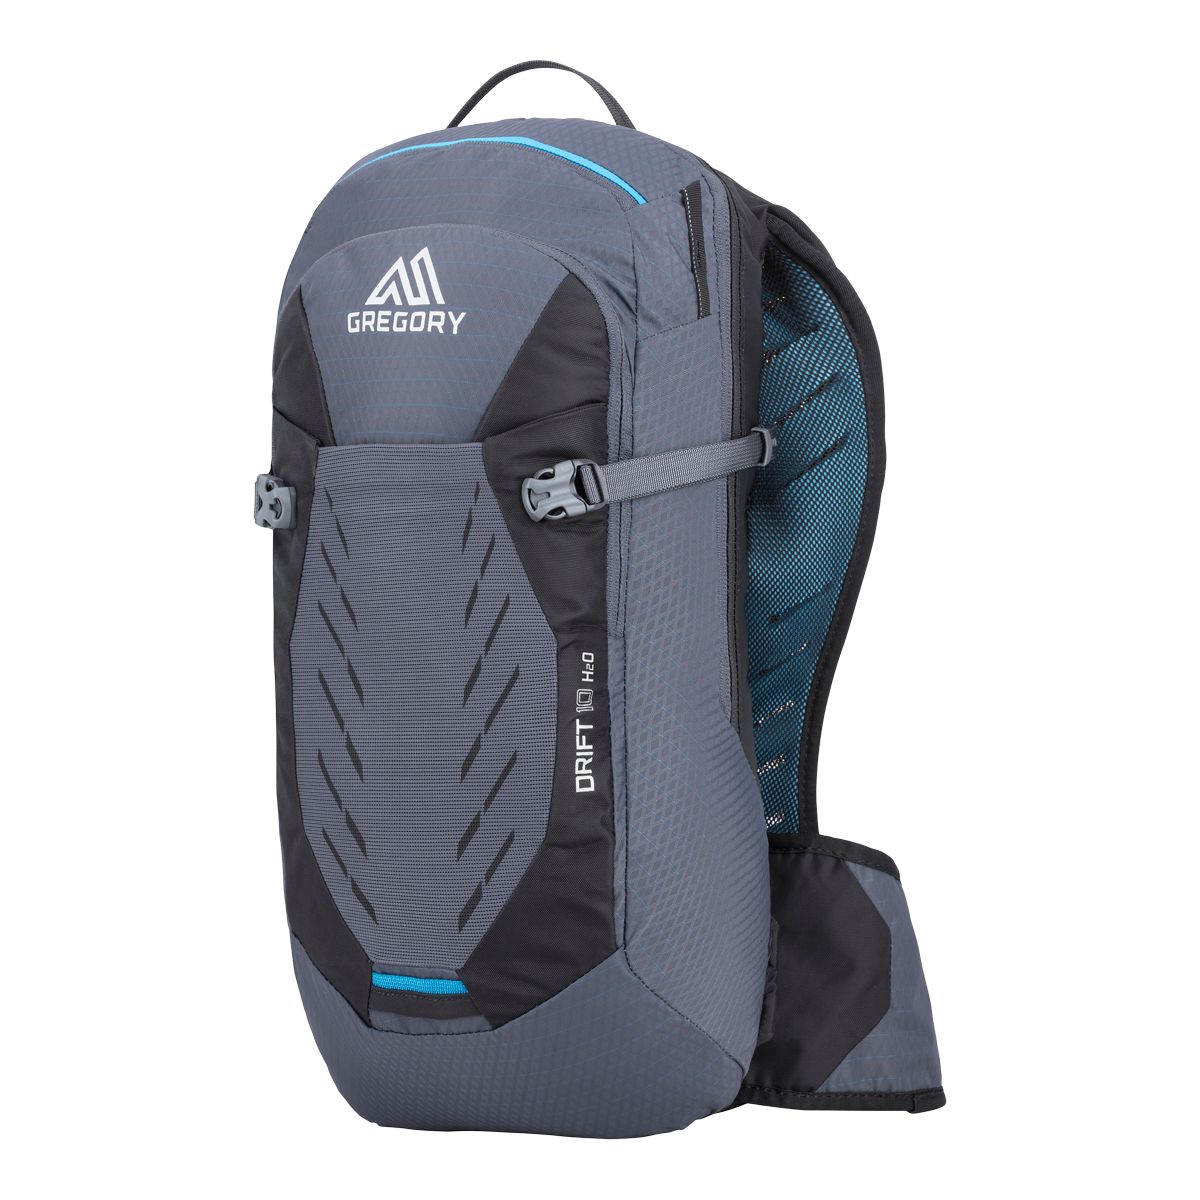 Gregory Drift 10 H20 Backpack with Reservoir